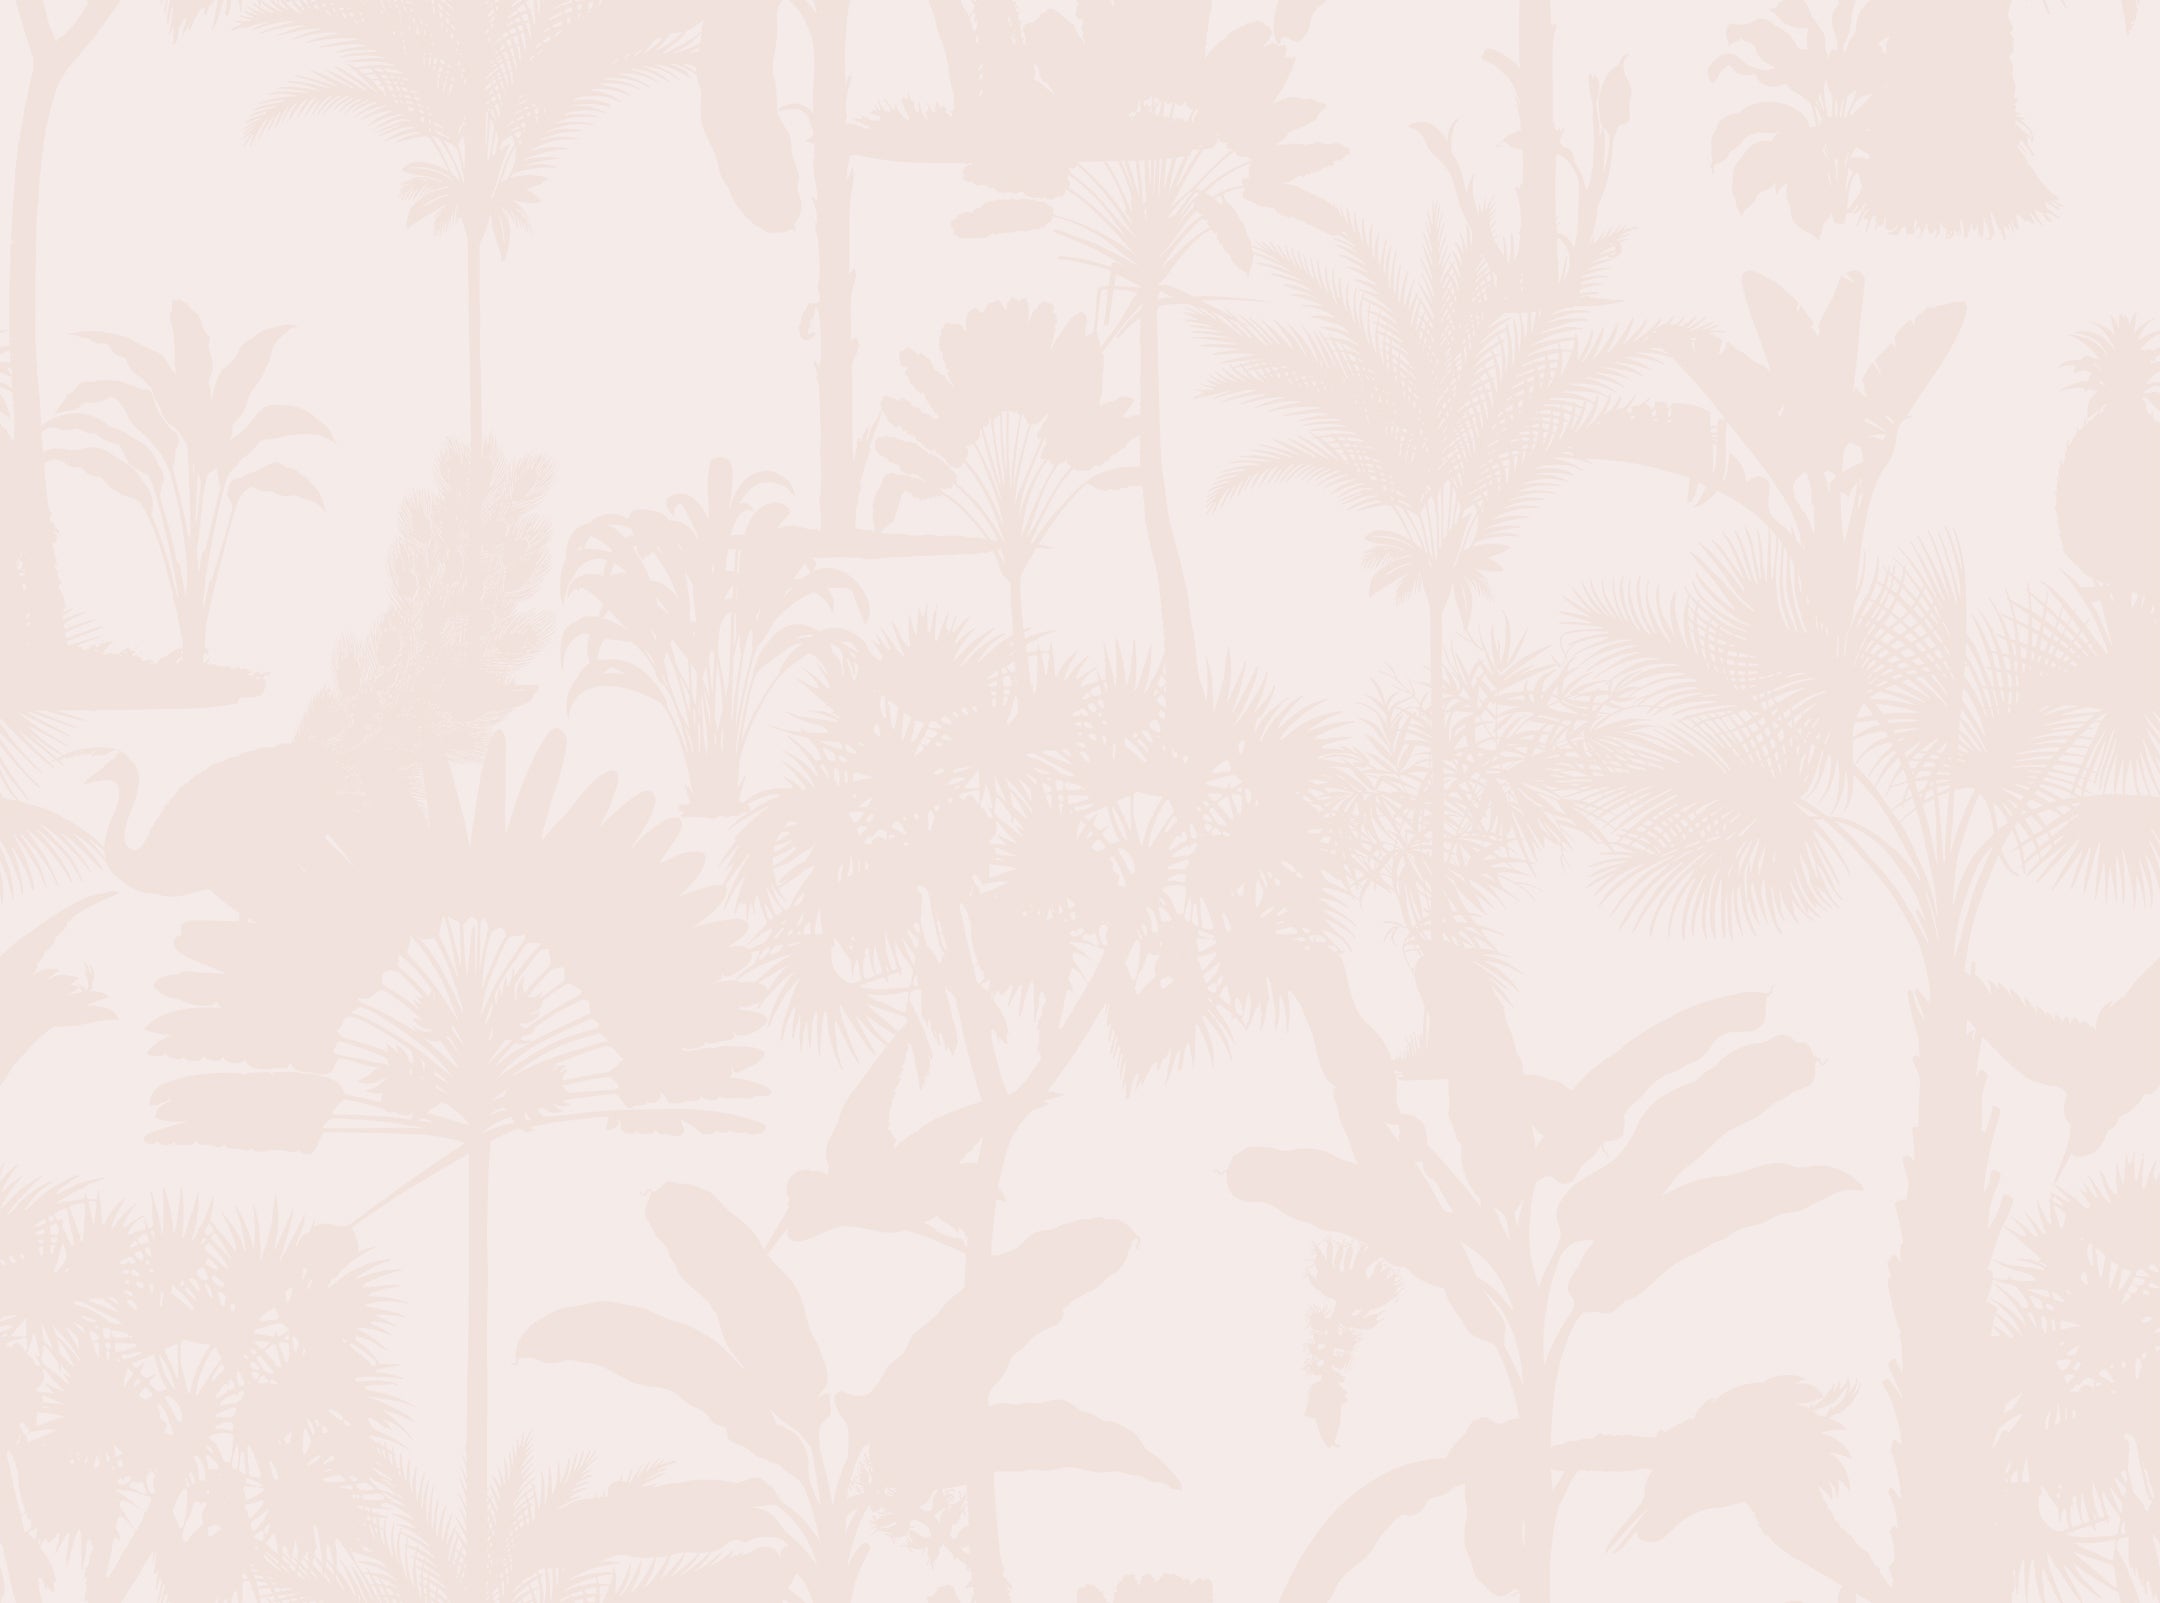 A monochromatic wallpaper featuring a soft pink background with white silhouettes of tropical foliage, including palms and fan leaves. This minimalist design combines nature-inspired shapes with a subtle color palette to create a calming atmosphere.